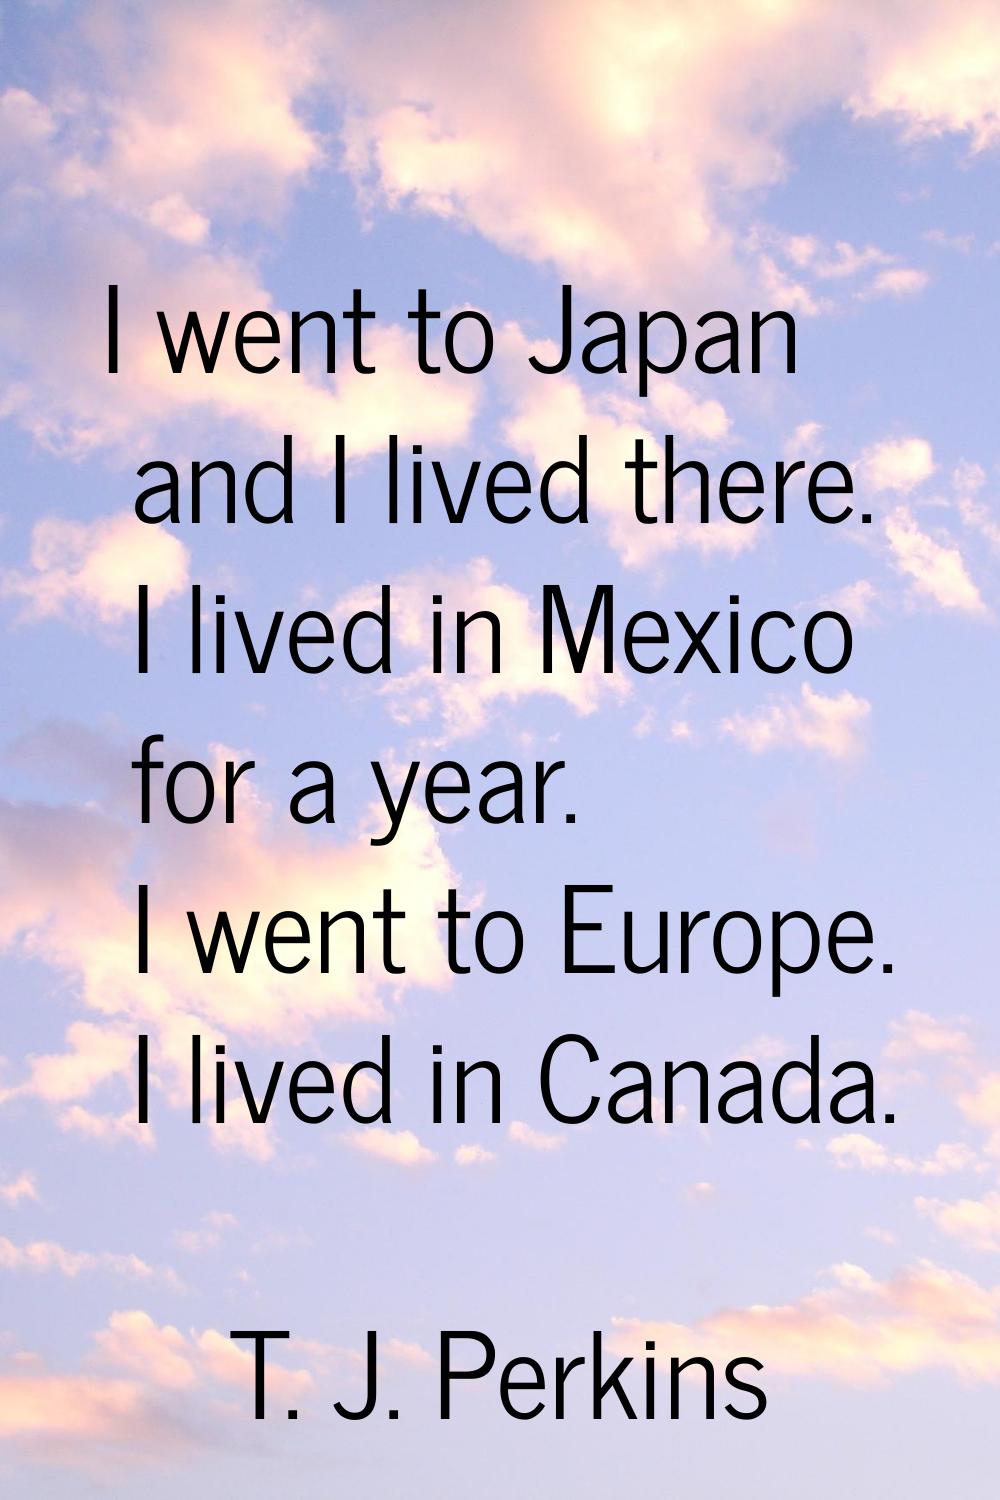 I went to Japan and I lived there. I lived in Mexico for a year. I went to Europe. I lived in Canad